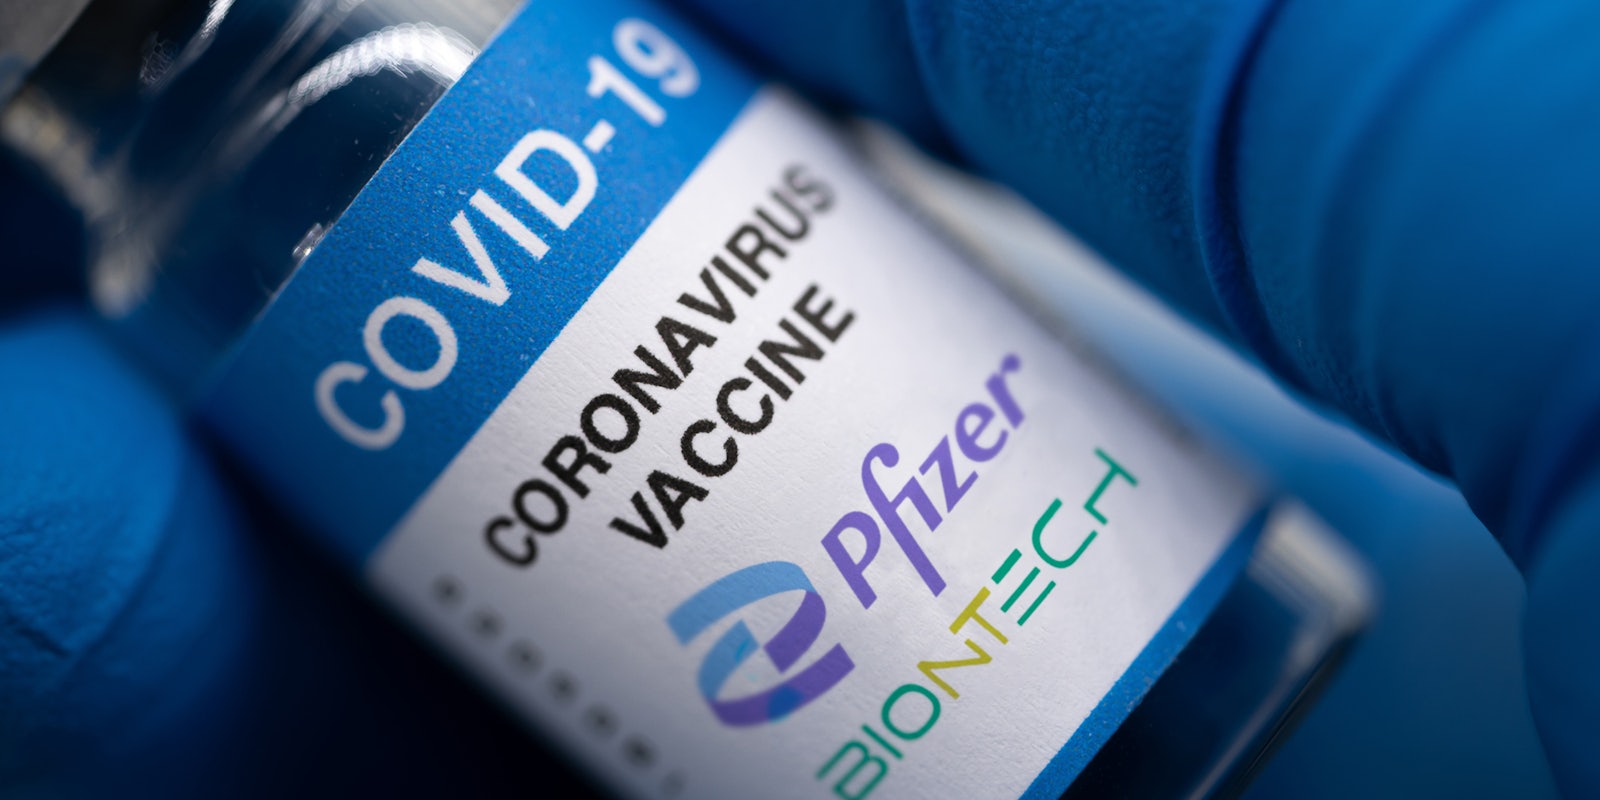 Covid-19 vaccine with Pfizer logo. Doctor's hand holds a bottle with a coronavirus vaccine on a white background.